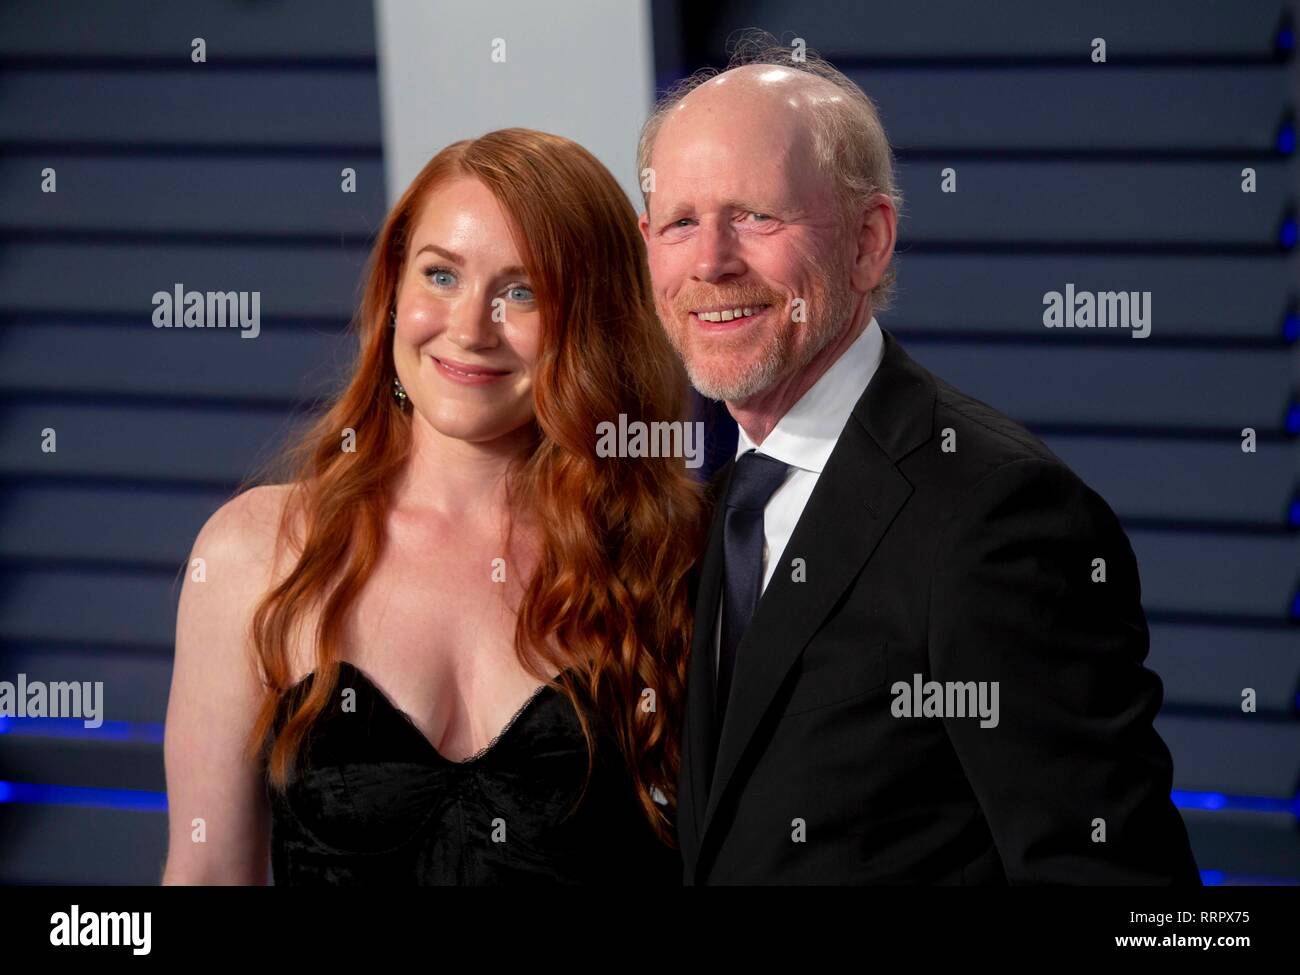 Paige Howard and Ron Howard attend the Vanity Fair Oscar Party at Wallis Annenberg Center for the Performing Arts in Beverly Hills, Los Angeles, USA, on 24 February 2019. | usage worldwide Stock Photo